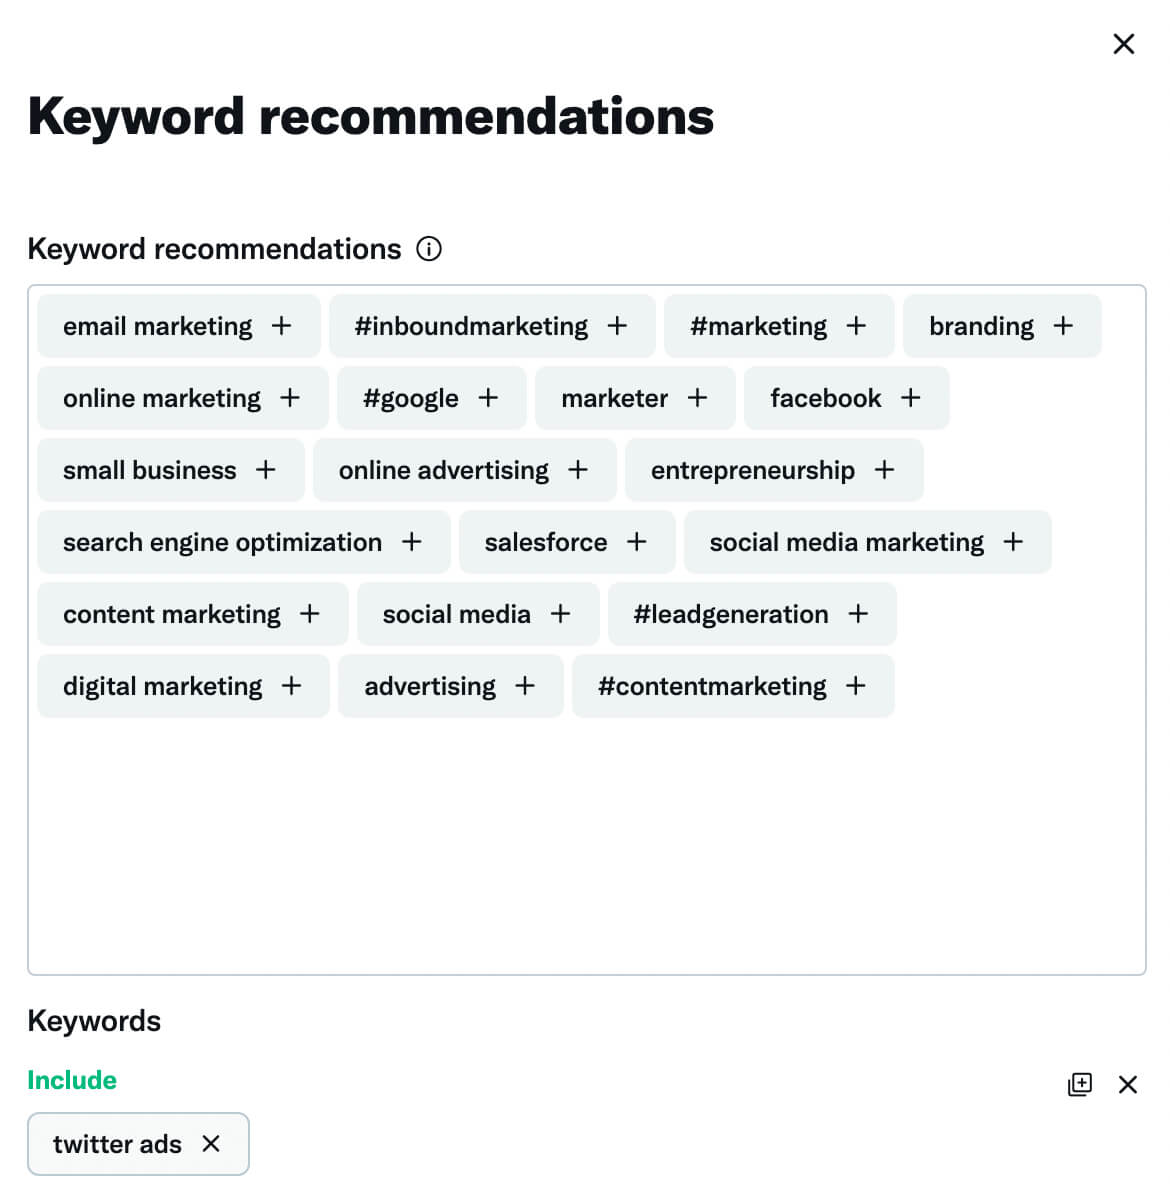 how-to-get-in-front-of-competitor-audiences-on-twitter-target-related-keyword-recommendtions-example-9